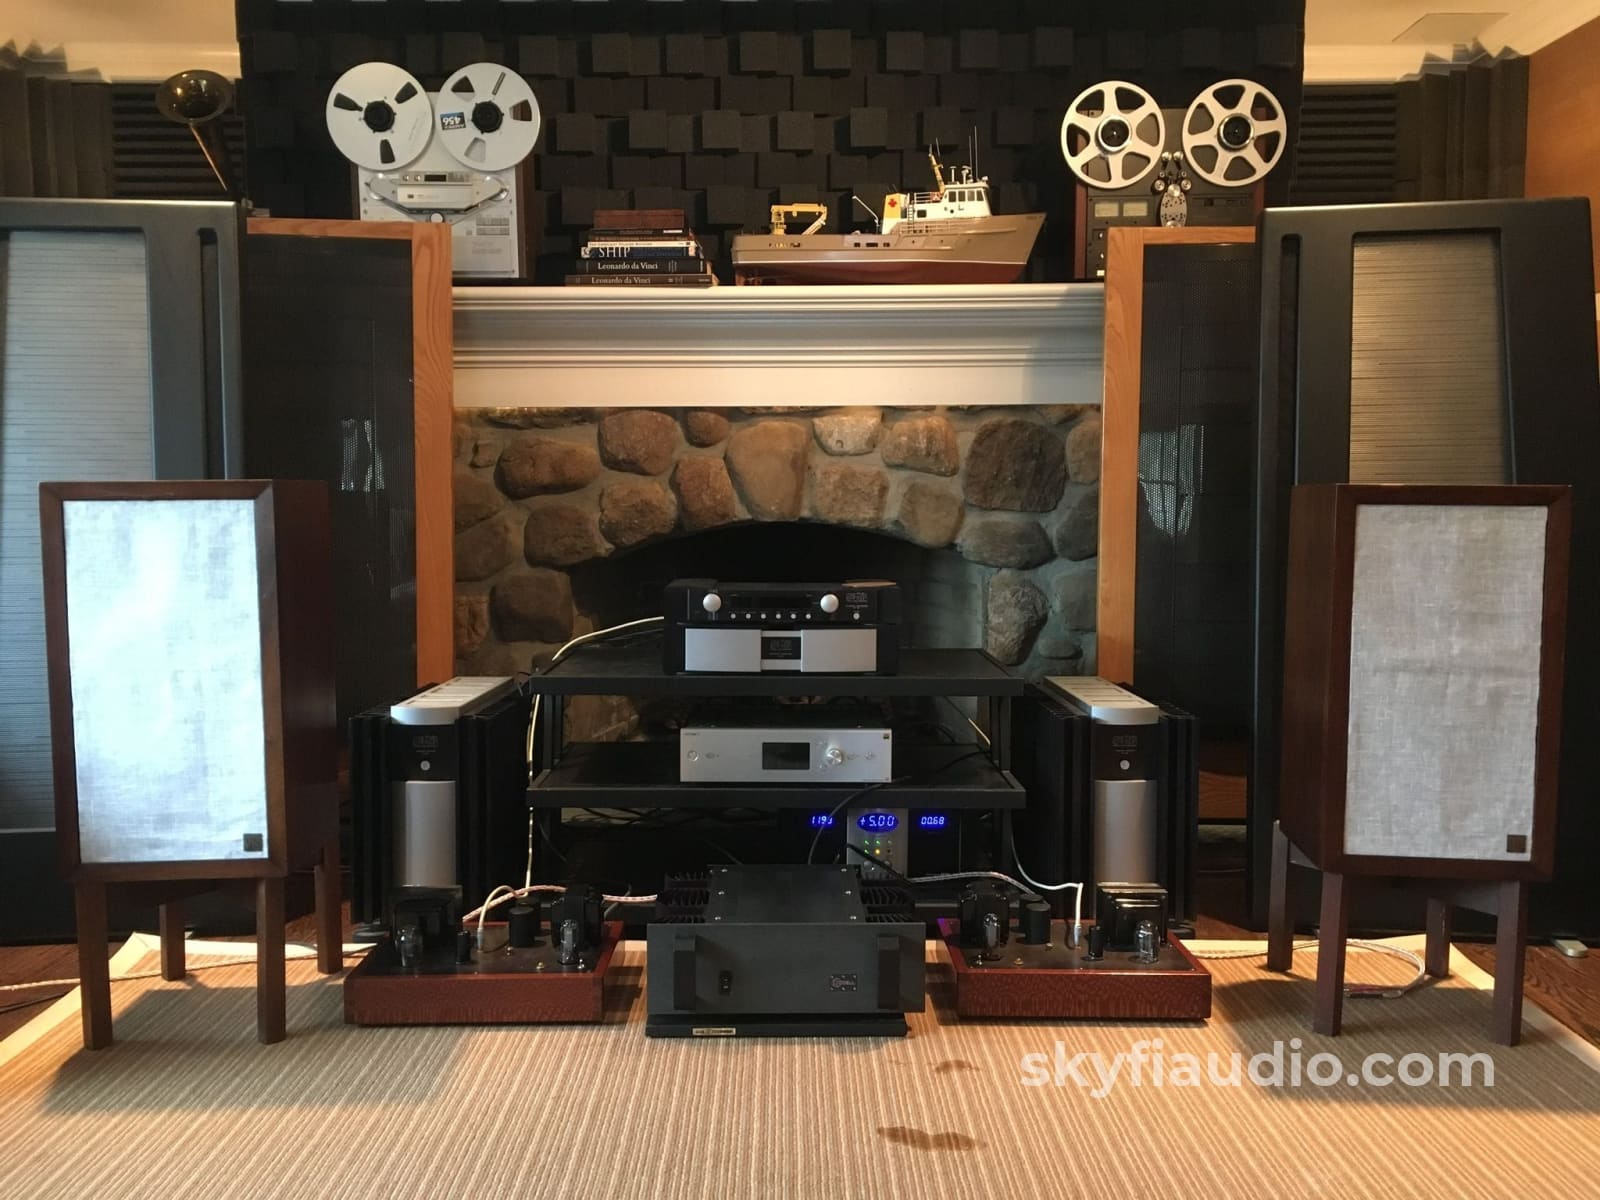 Acoustic Research Ar-3 Speakers